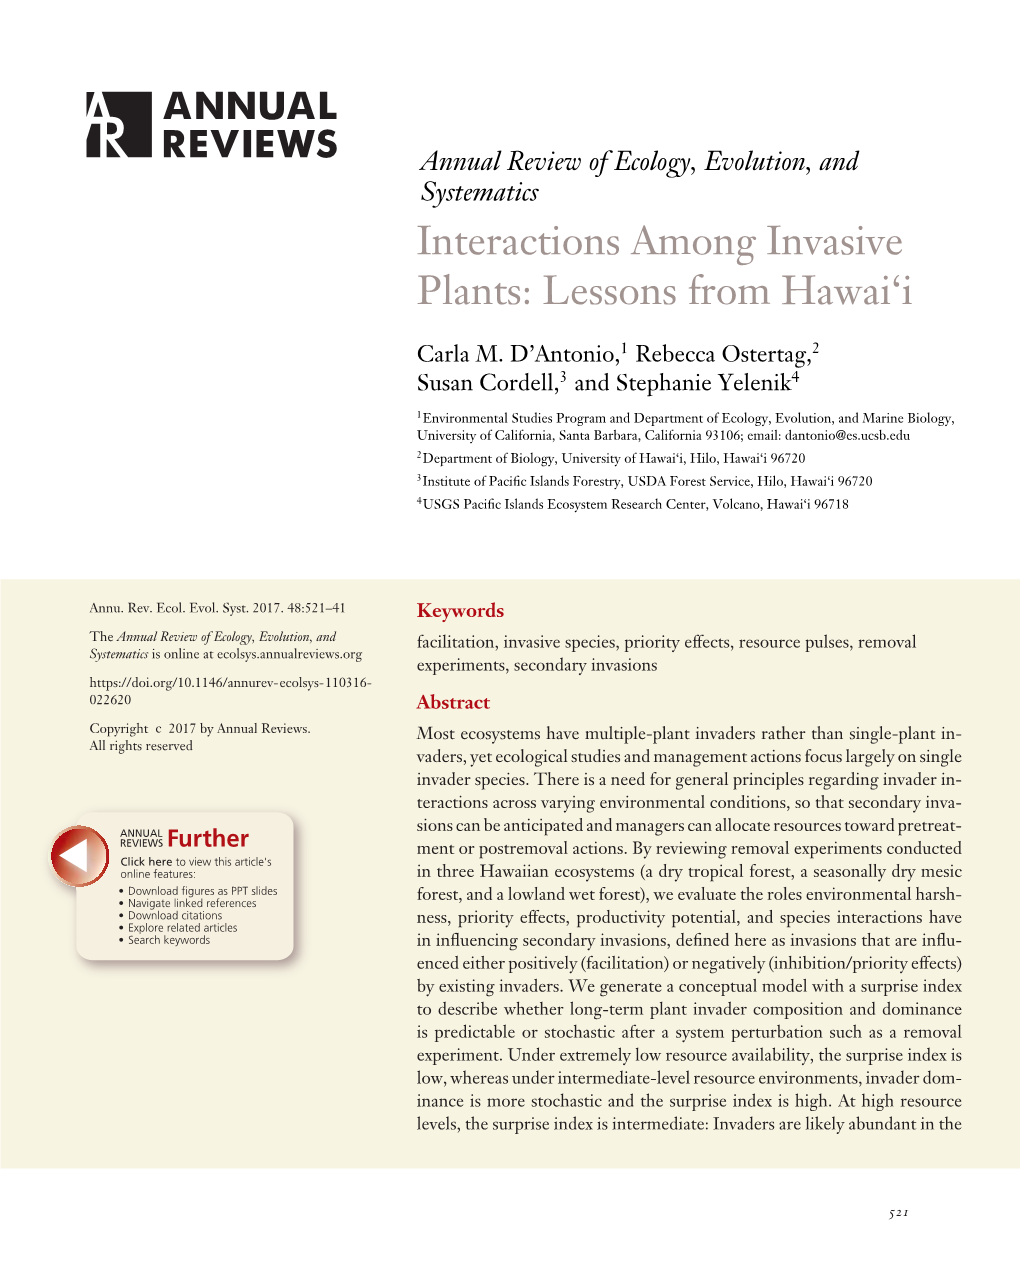 Interactions Among Invasive Plants: Lessons from Hawai'i